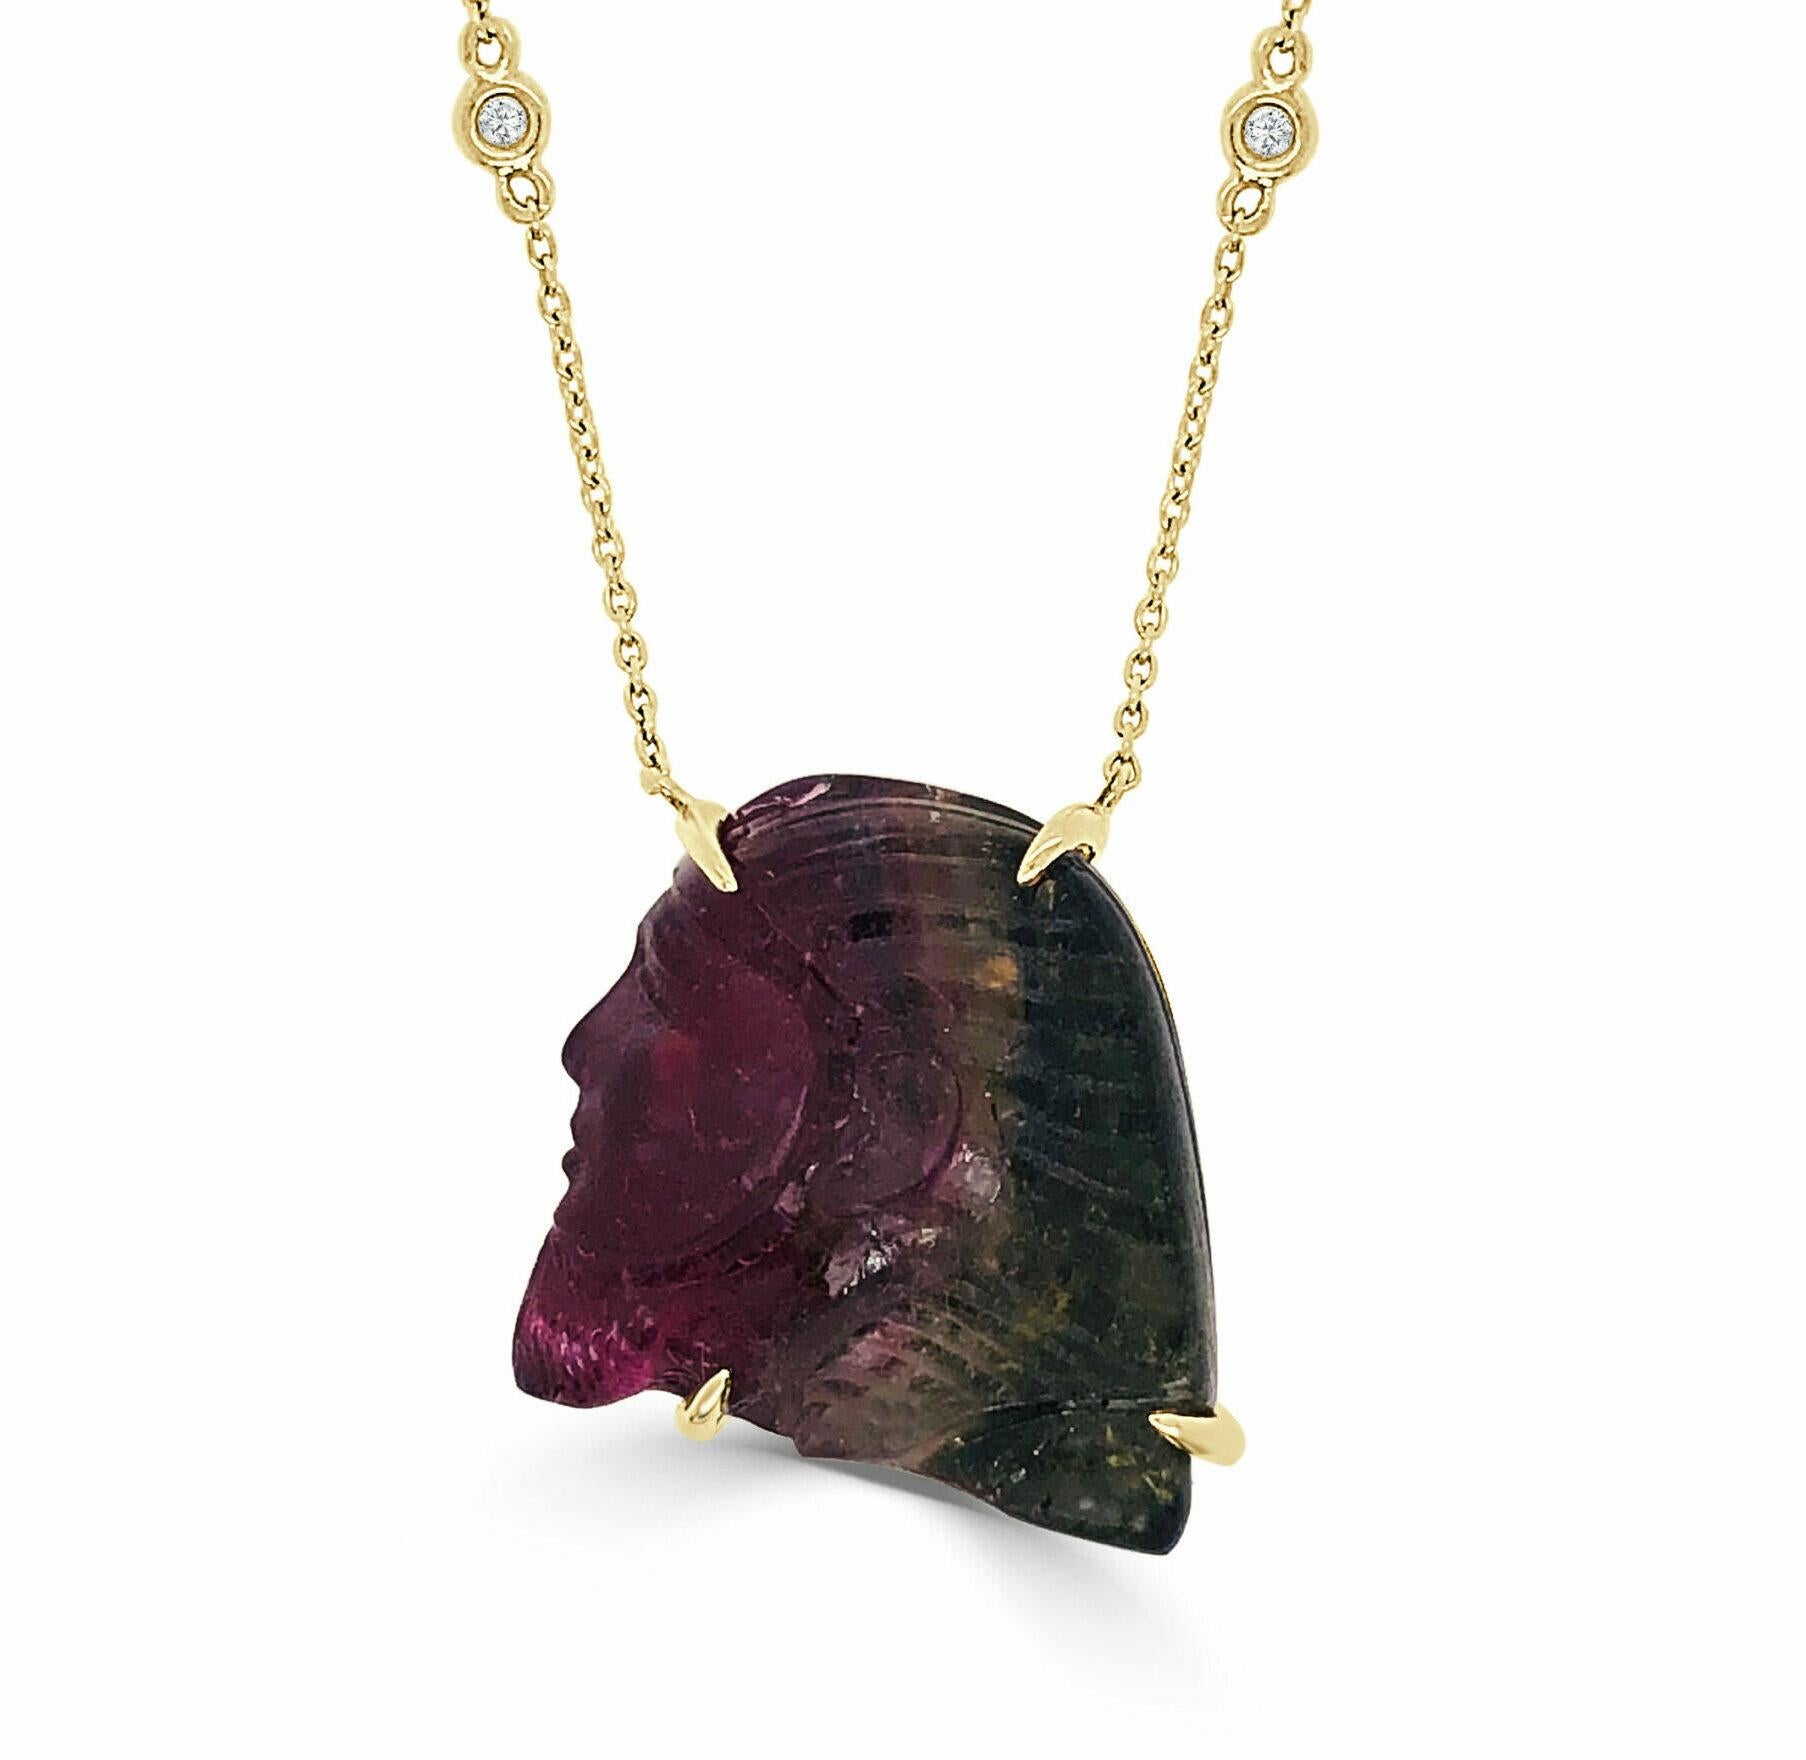 Watermelon Tourmaline & Diamond Pharaoh Head One Of A Kind Pendant With Chain. Tourmaline 45.74 Ct, Diamond 0.13 Ct, approximately 22 mm x 21.5 mm

Available in other metal/ gemstone options: These Gemstone pieces can be made in white, pink, yellow